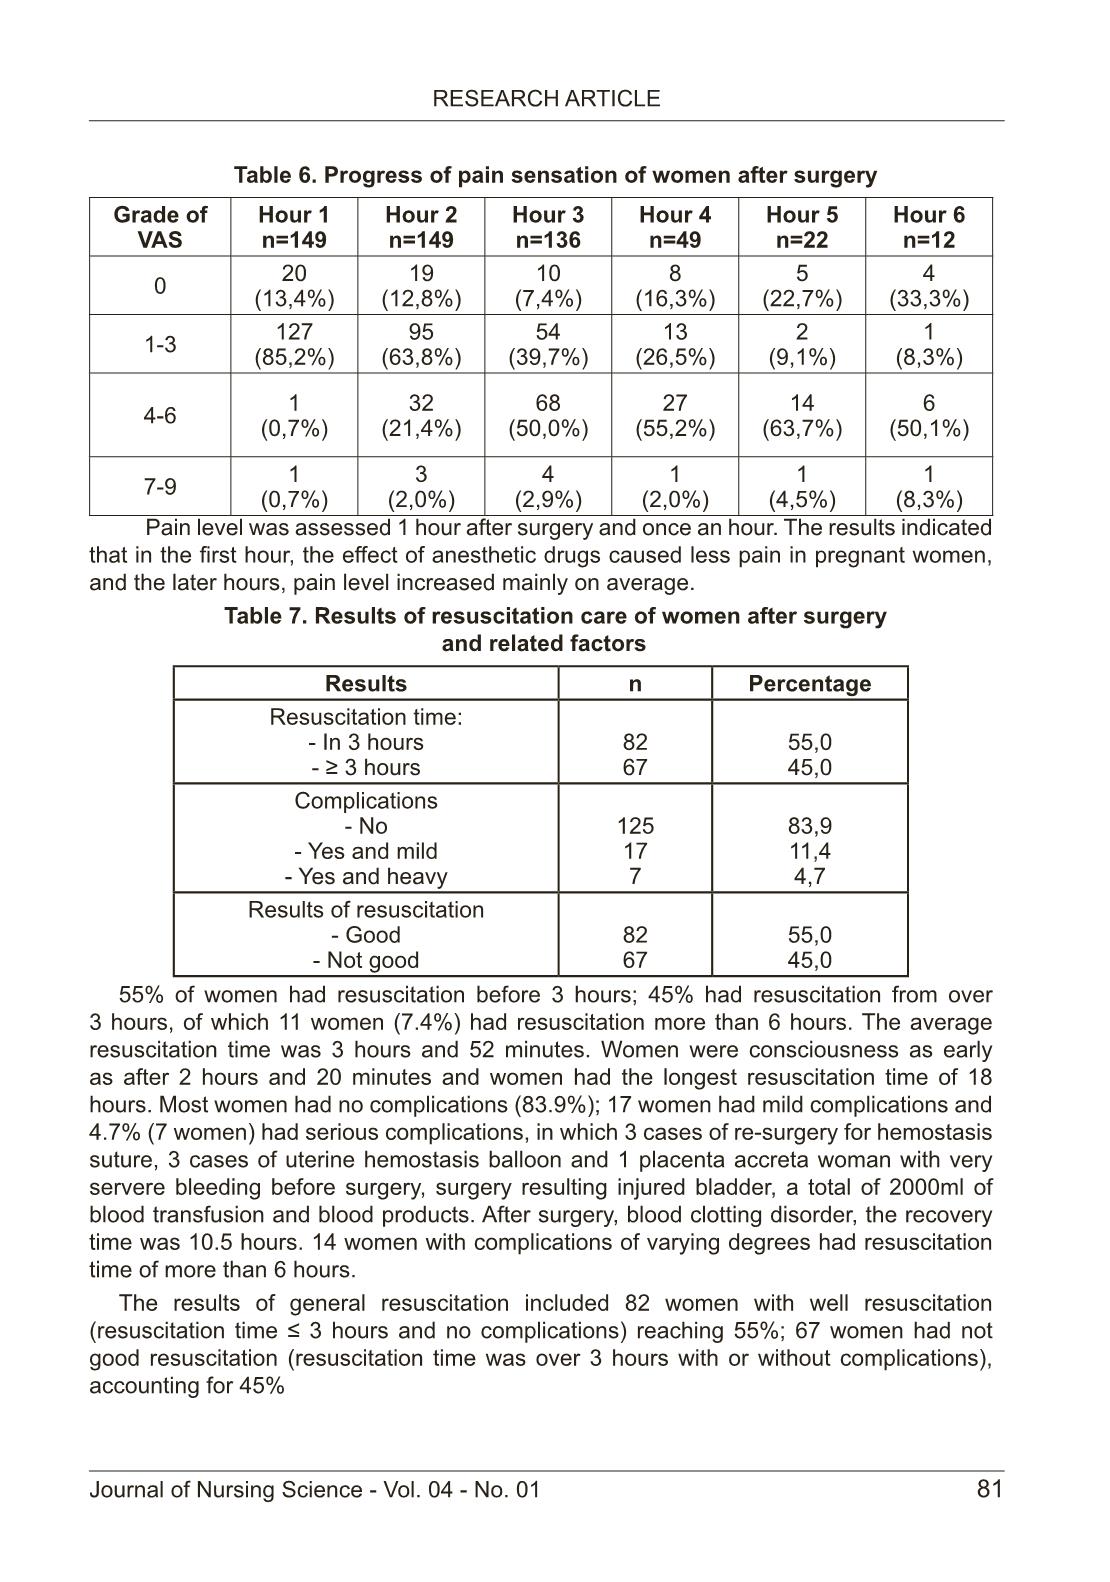 Characteristics of women with cesarean section due to placenta previa at national hospital of obstetric and gynecology in 2020 trang 6